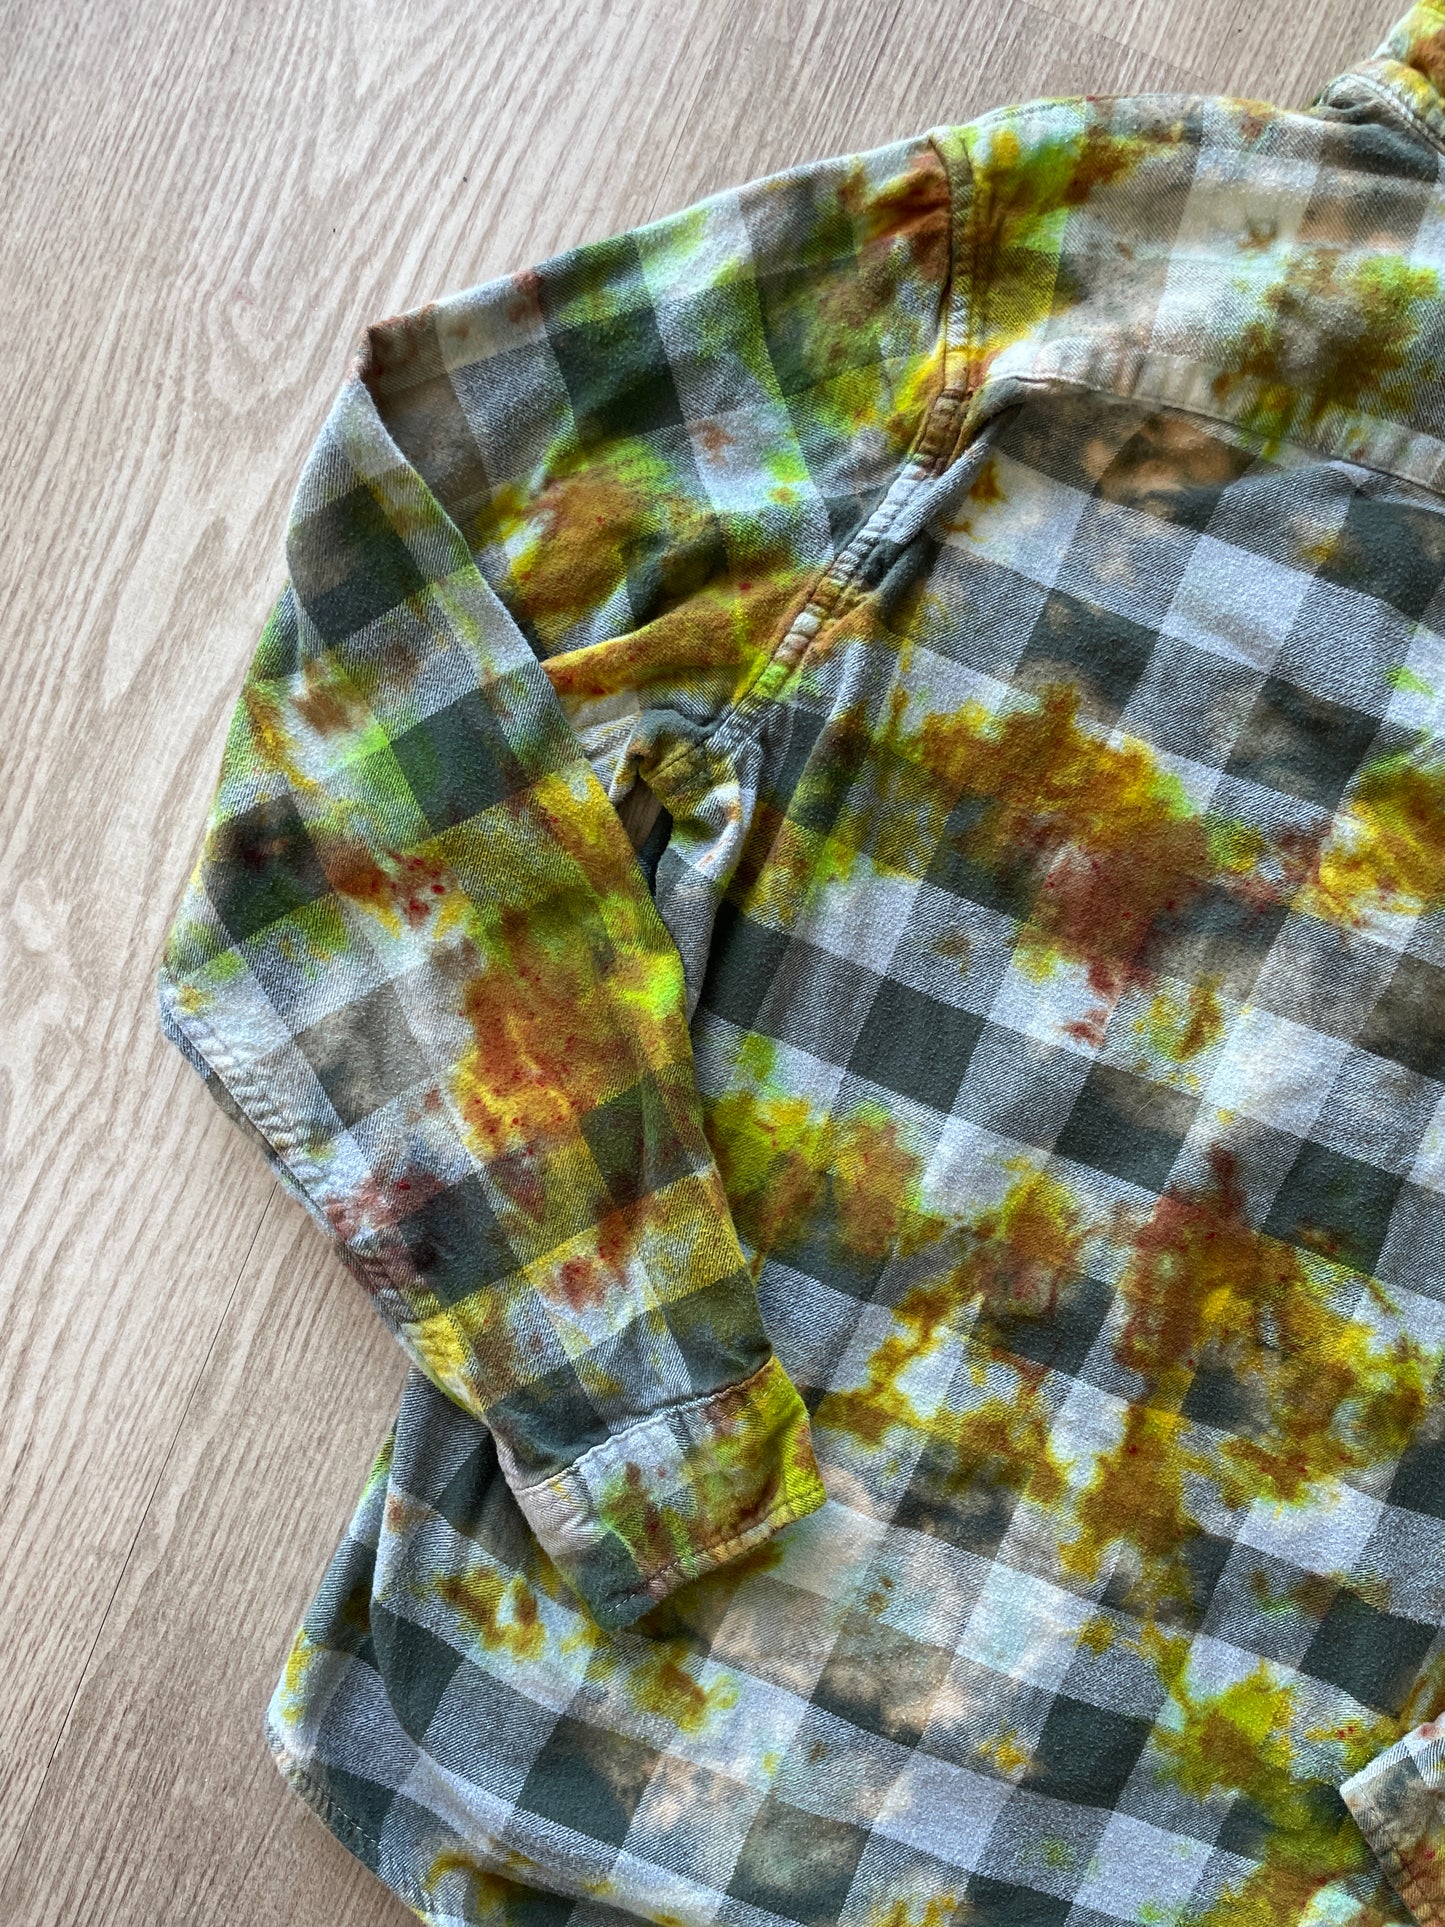 MEDIUM Men’s Climbing Shoe Green, Yellow, and White Handmade Tie Dye Flannel Shirt | One-Of-a-Kind Upcycled Long Sleeve